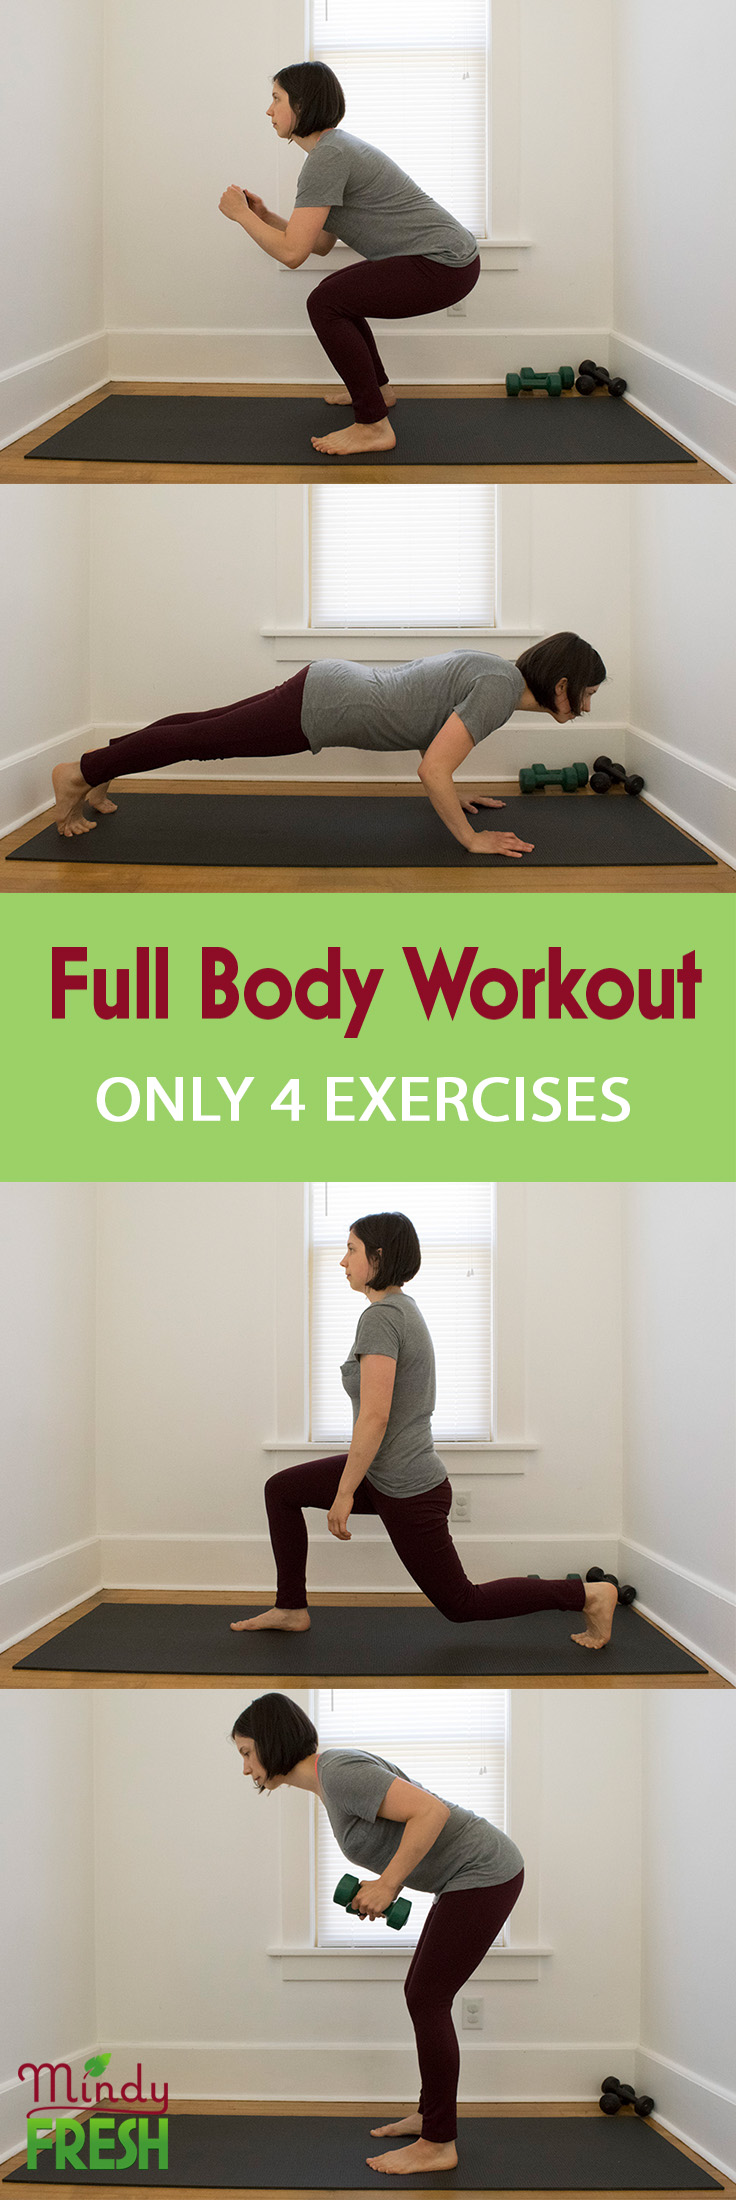 4 exercises to a full body workout complete with squat, push up, lunge, and row exercises